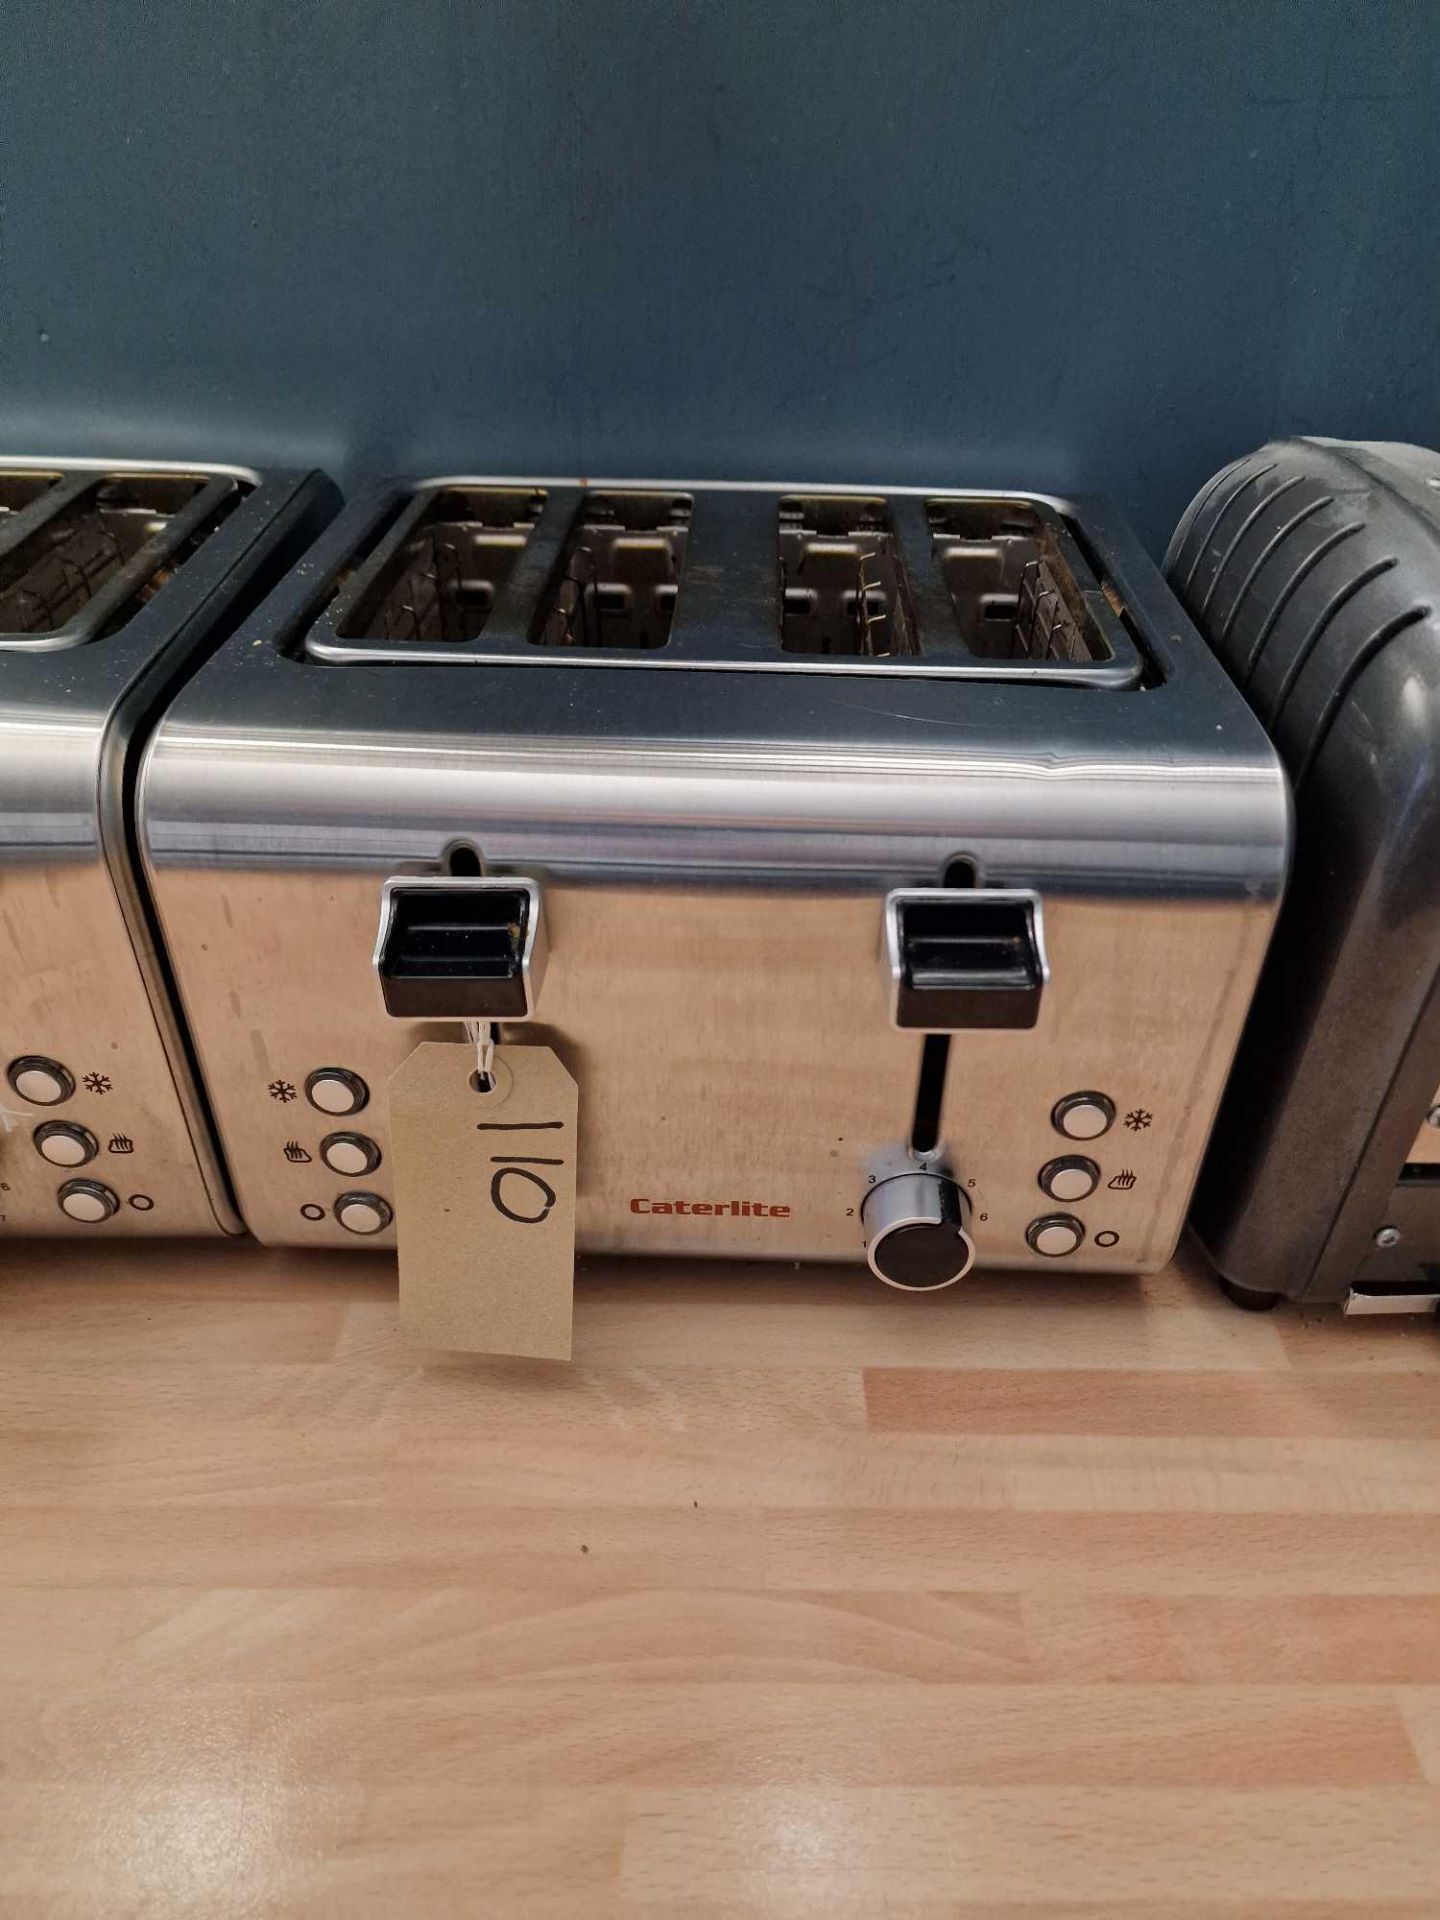 Caterlite 4 Slot Stainless Steel Toaster Adjustable Browning Control 1.4kw To 1.6kw Depending On